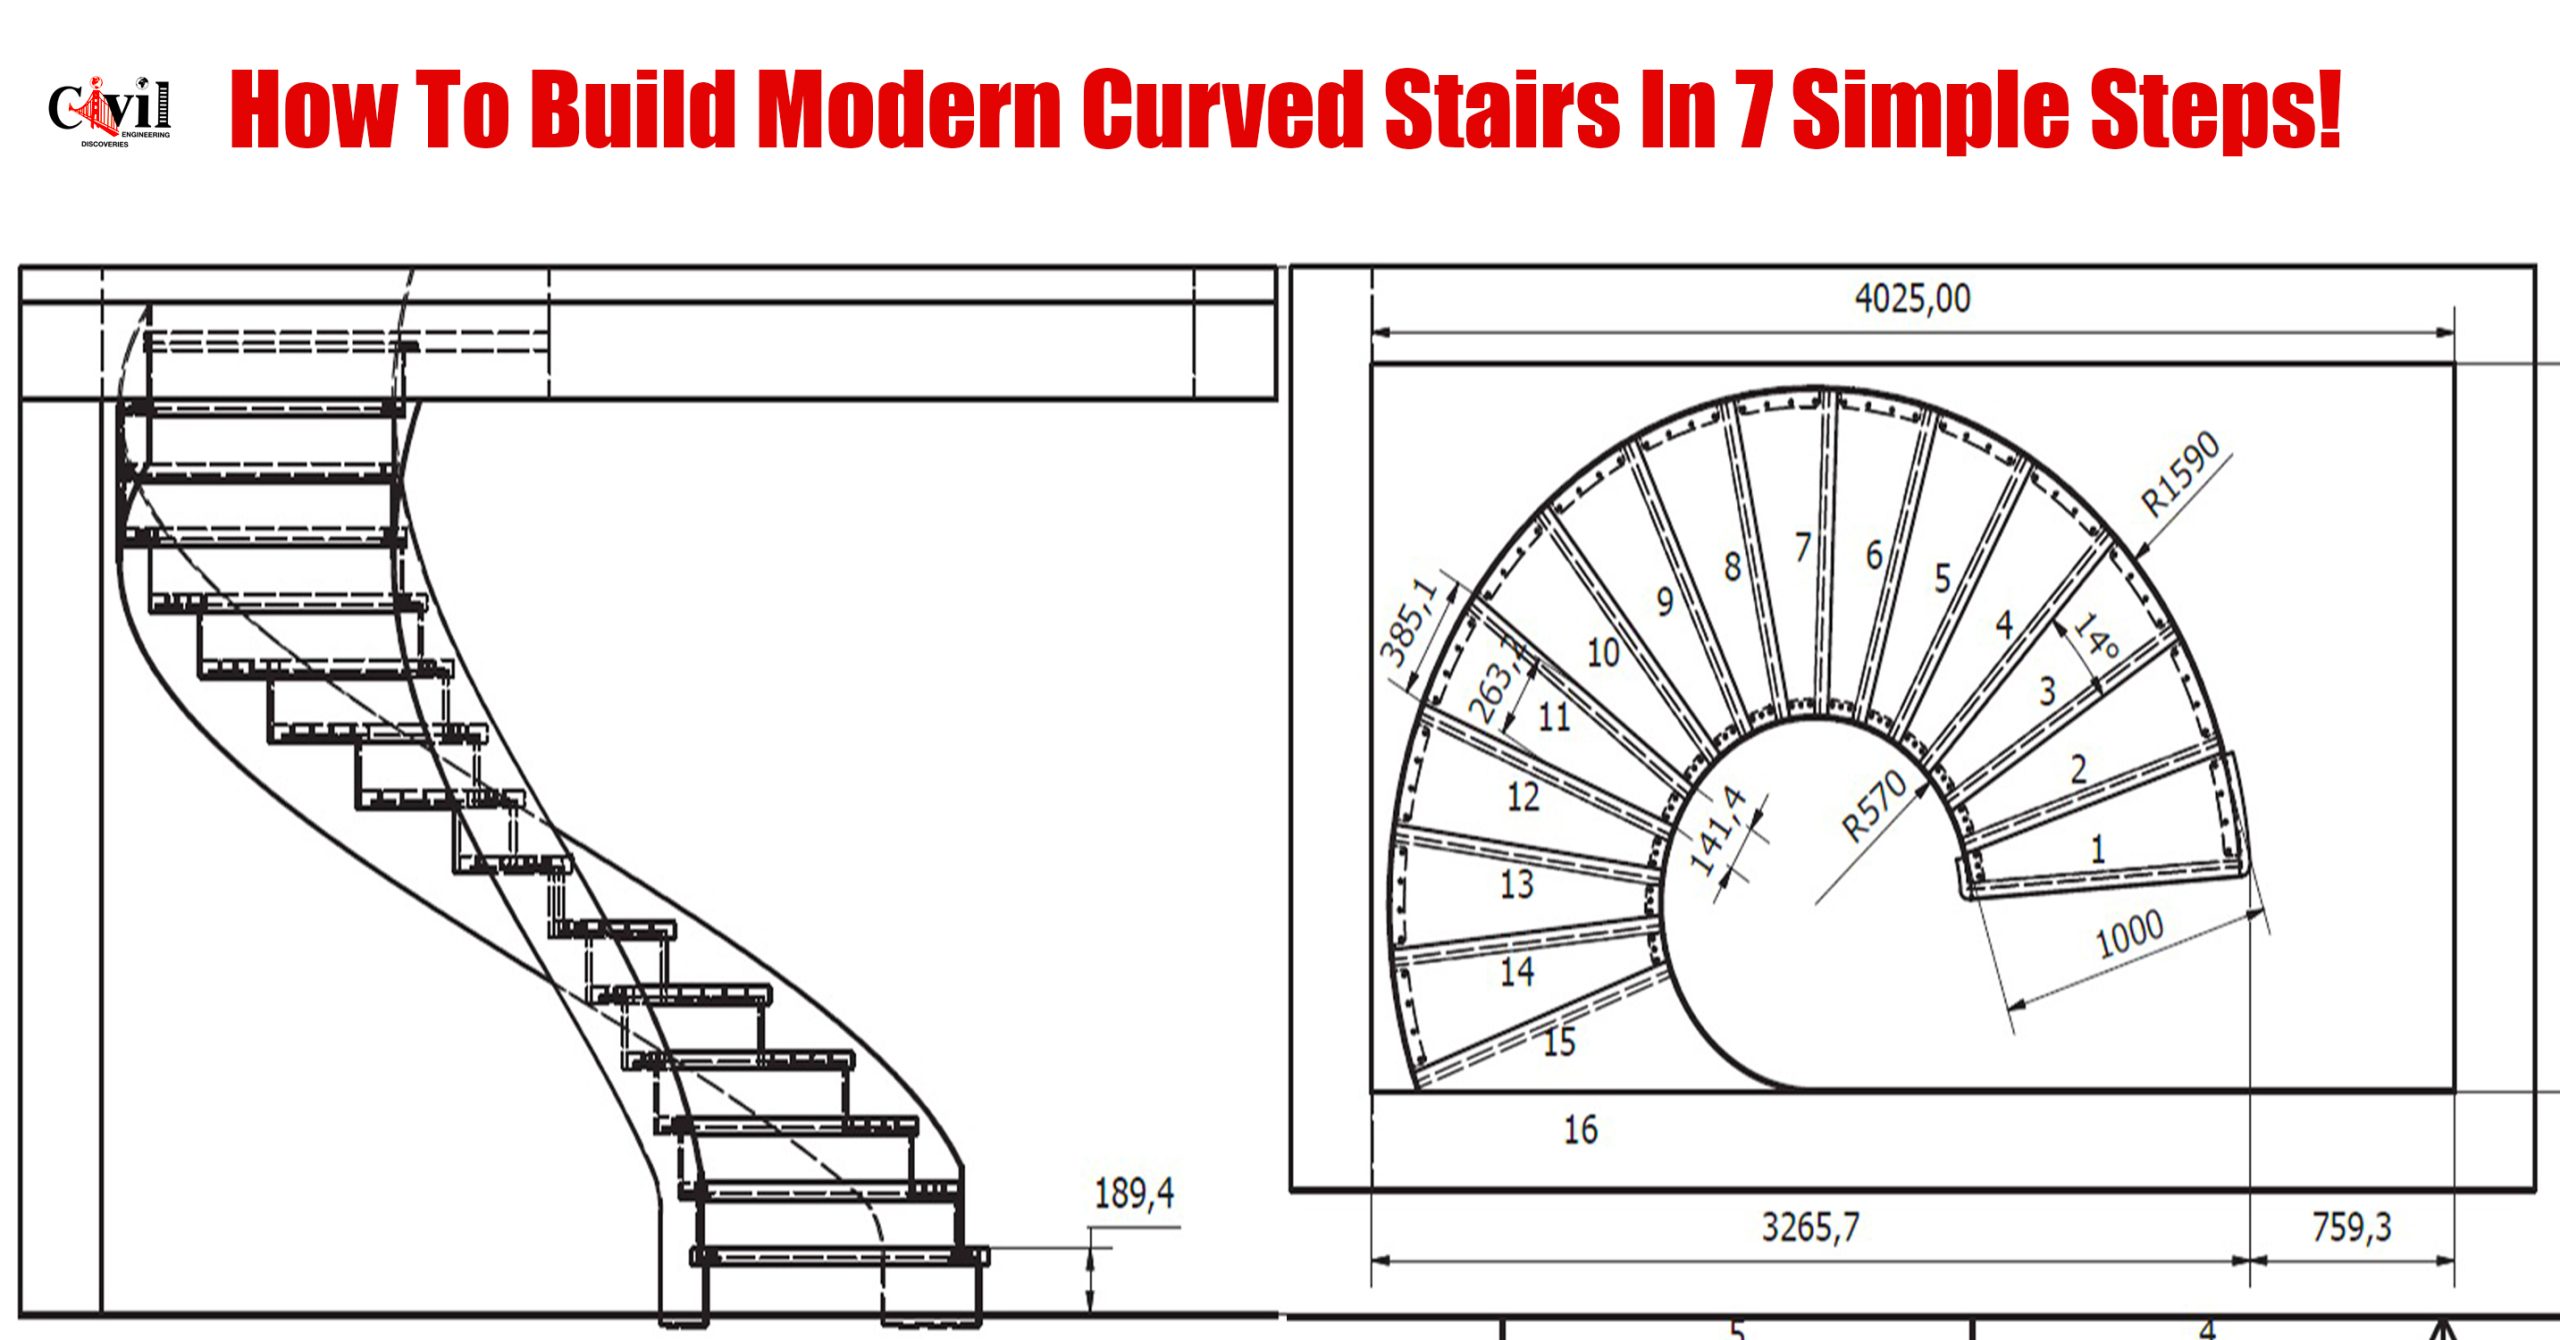 Curved Stairs - Part 1 